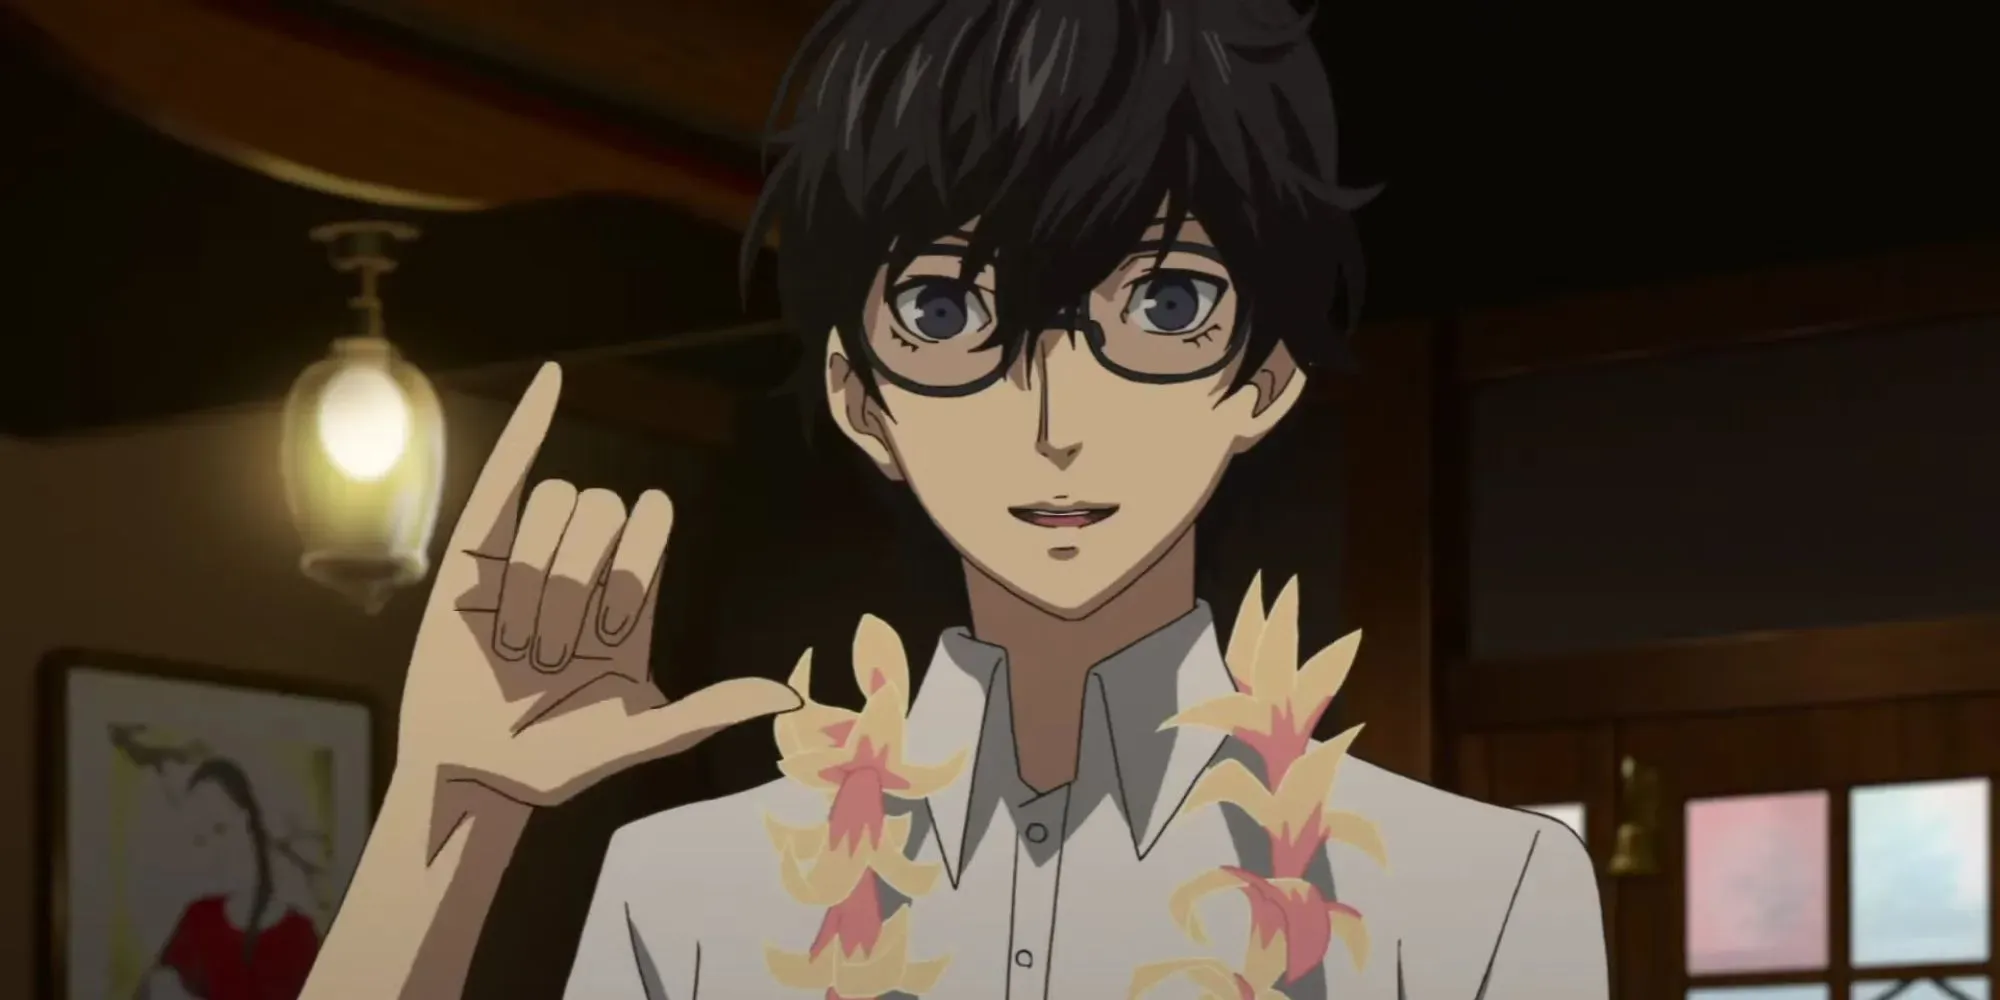 Persona 5 Joker makes the hand symbol after coming back from Hawaii